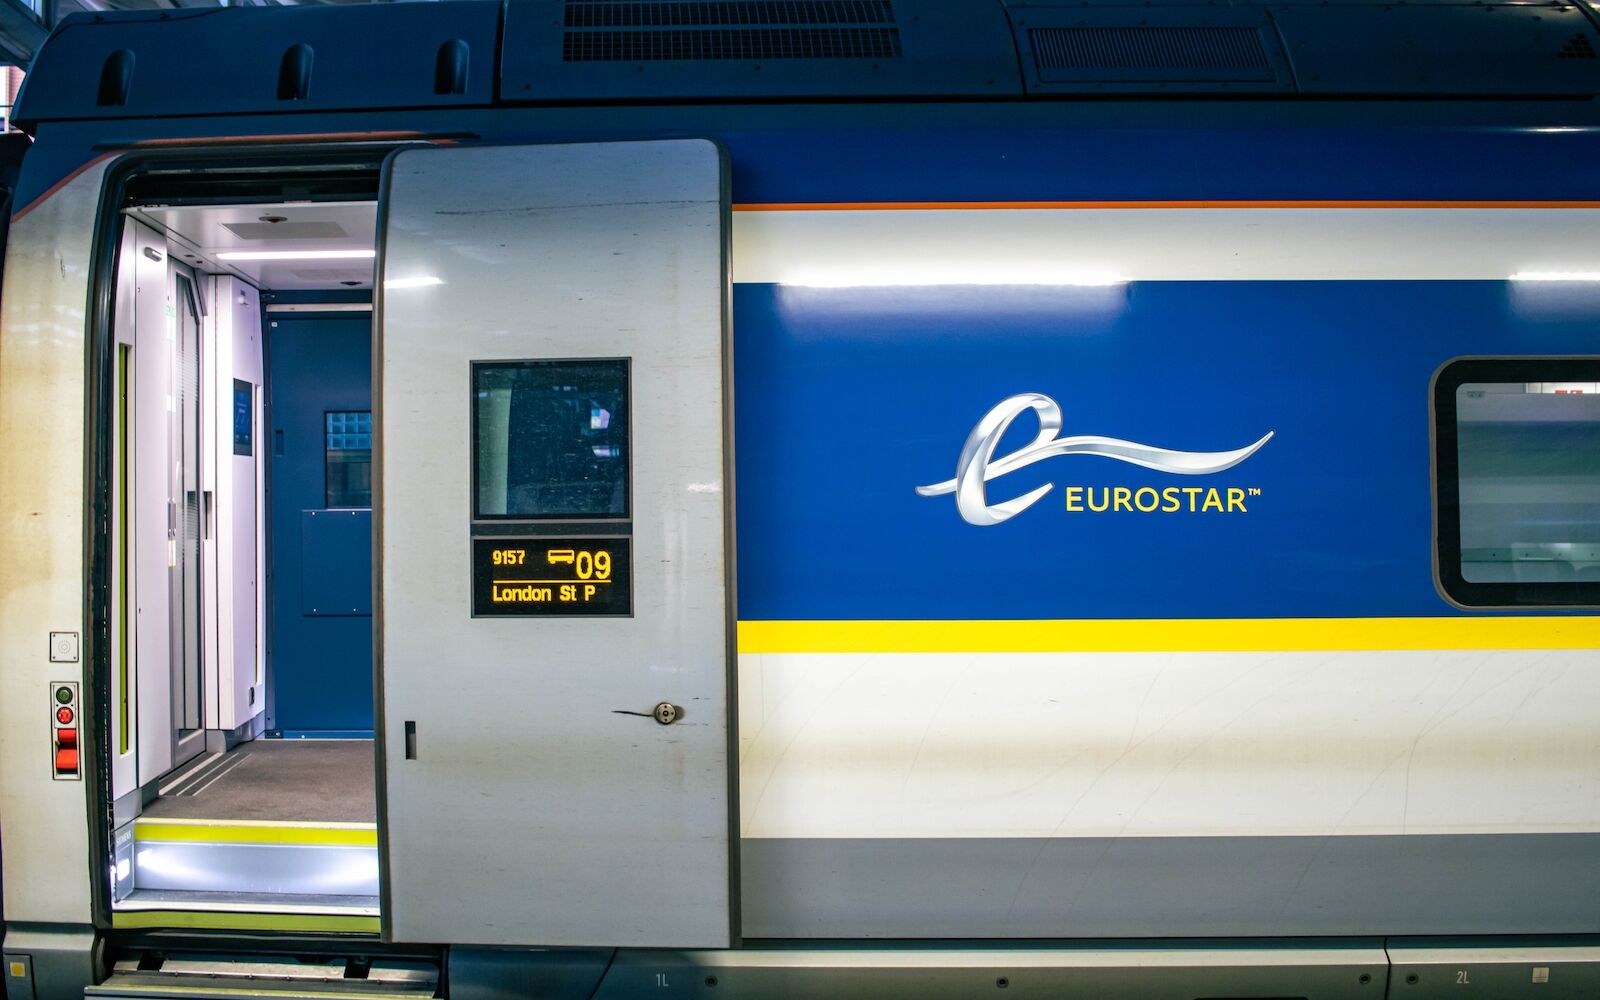 The Eurostar is a train that takes passengers from London to Amsterdam directly, among other destinations